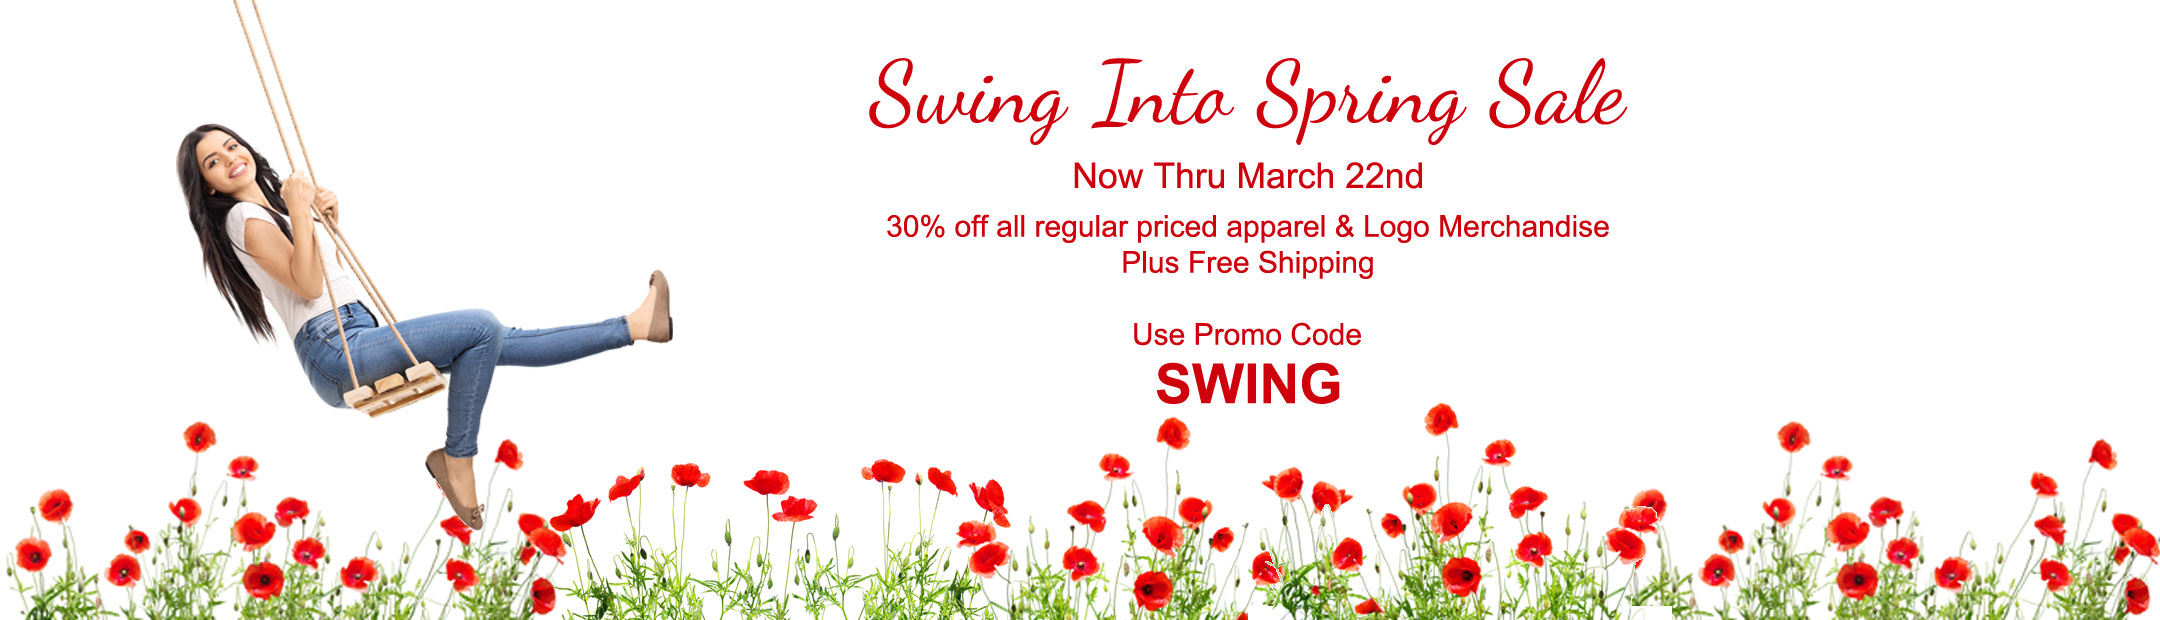 Suing Into Spring Sale until March 22nd. 30% off regular prices apparel and Logo Merchandise plus free shipping. Use Promo Code SWING